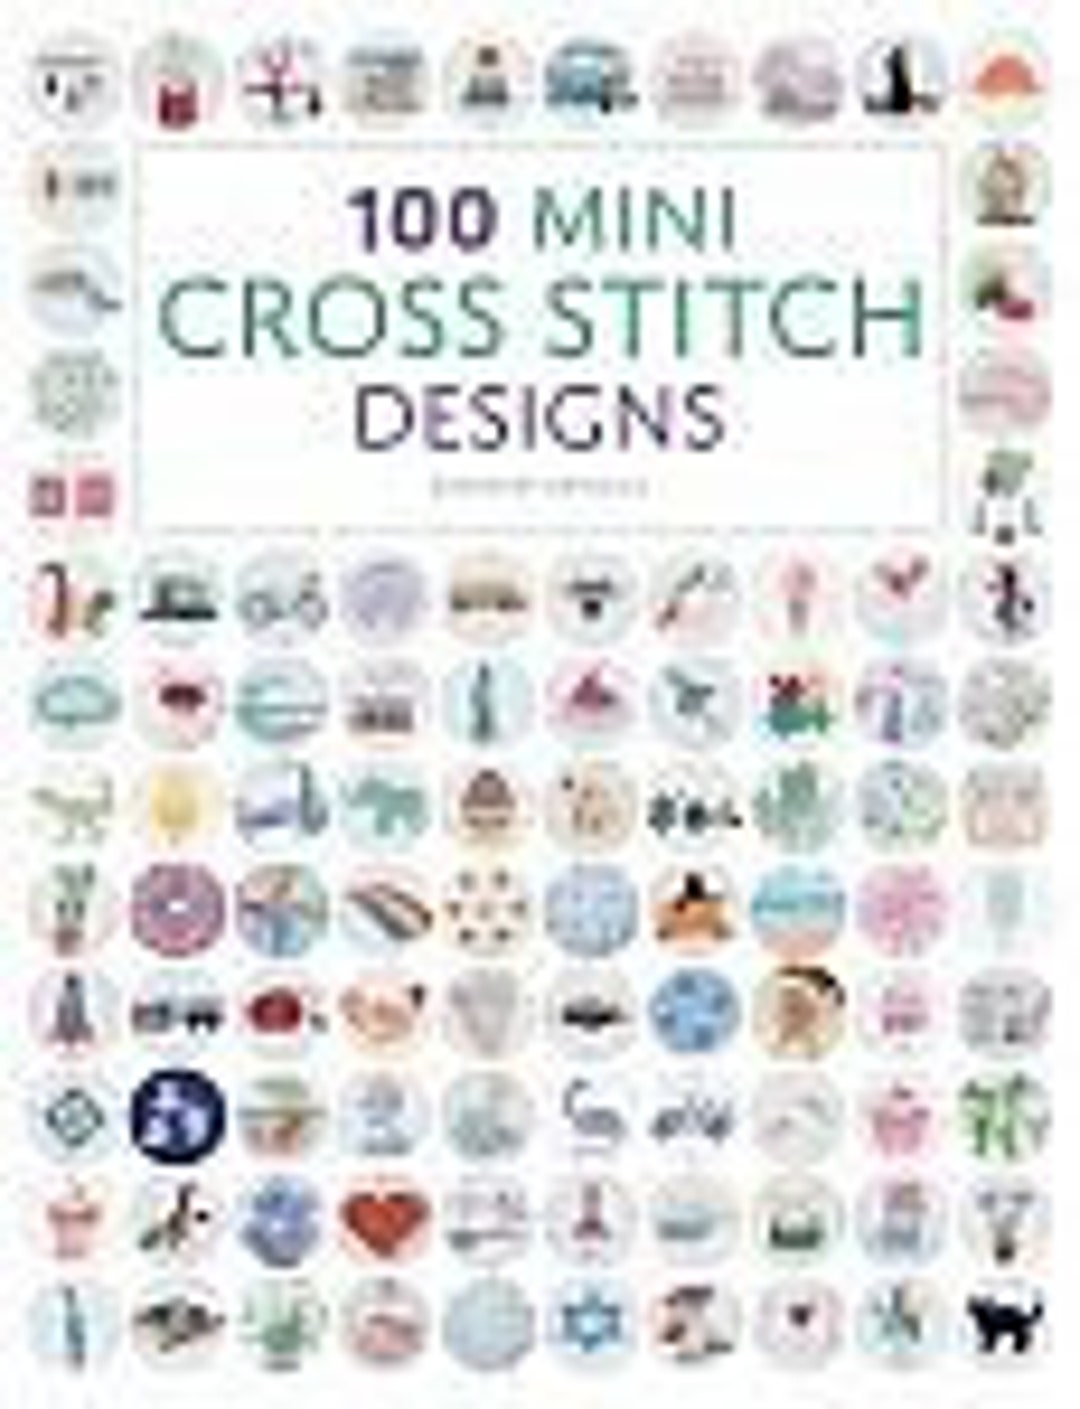 100+ Cross Stitch Patterns to Mix and Match From Search Press